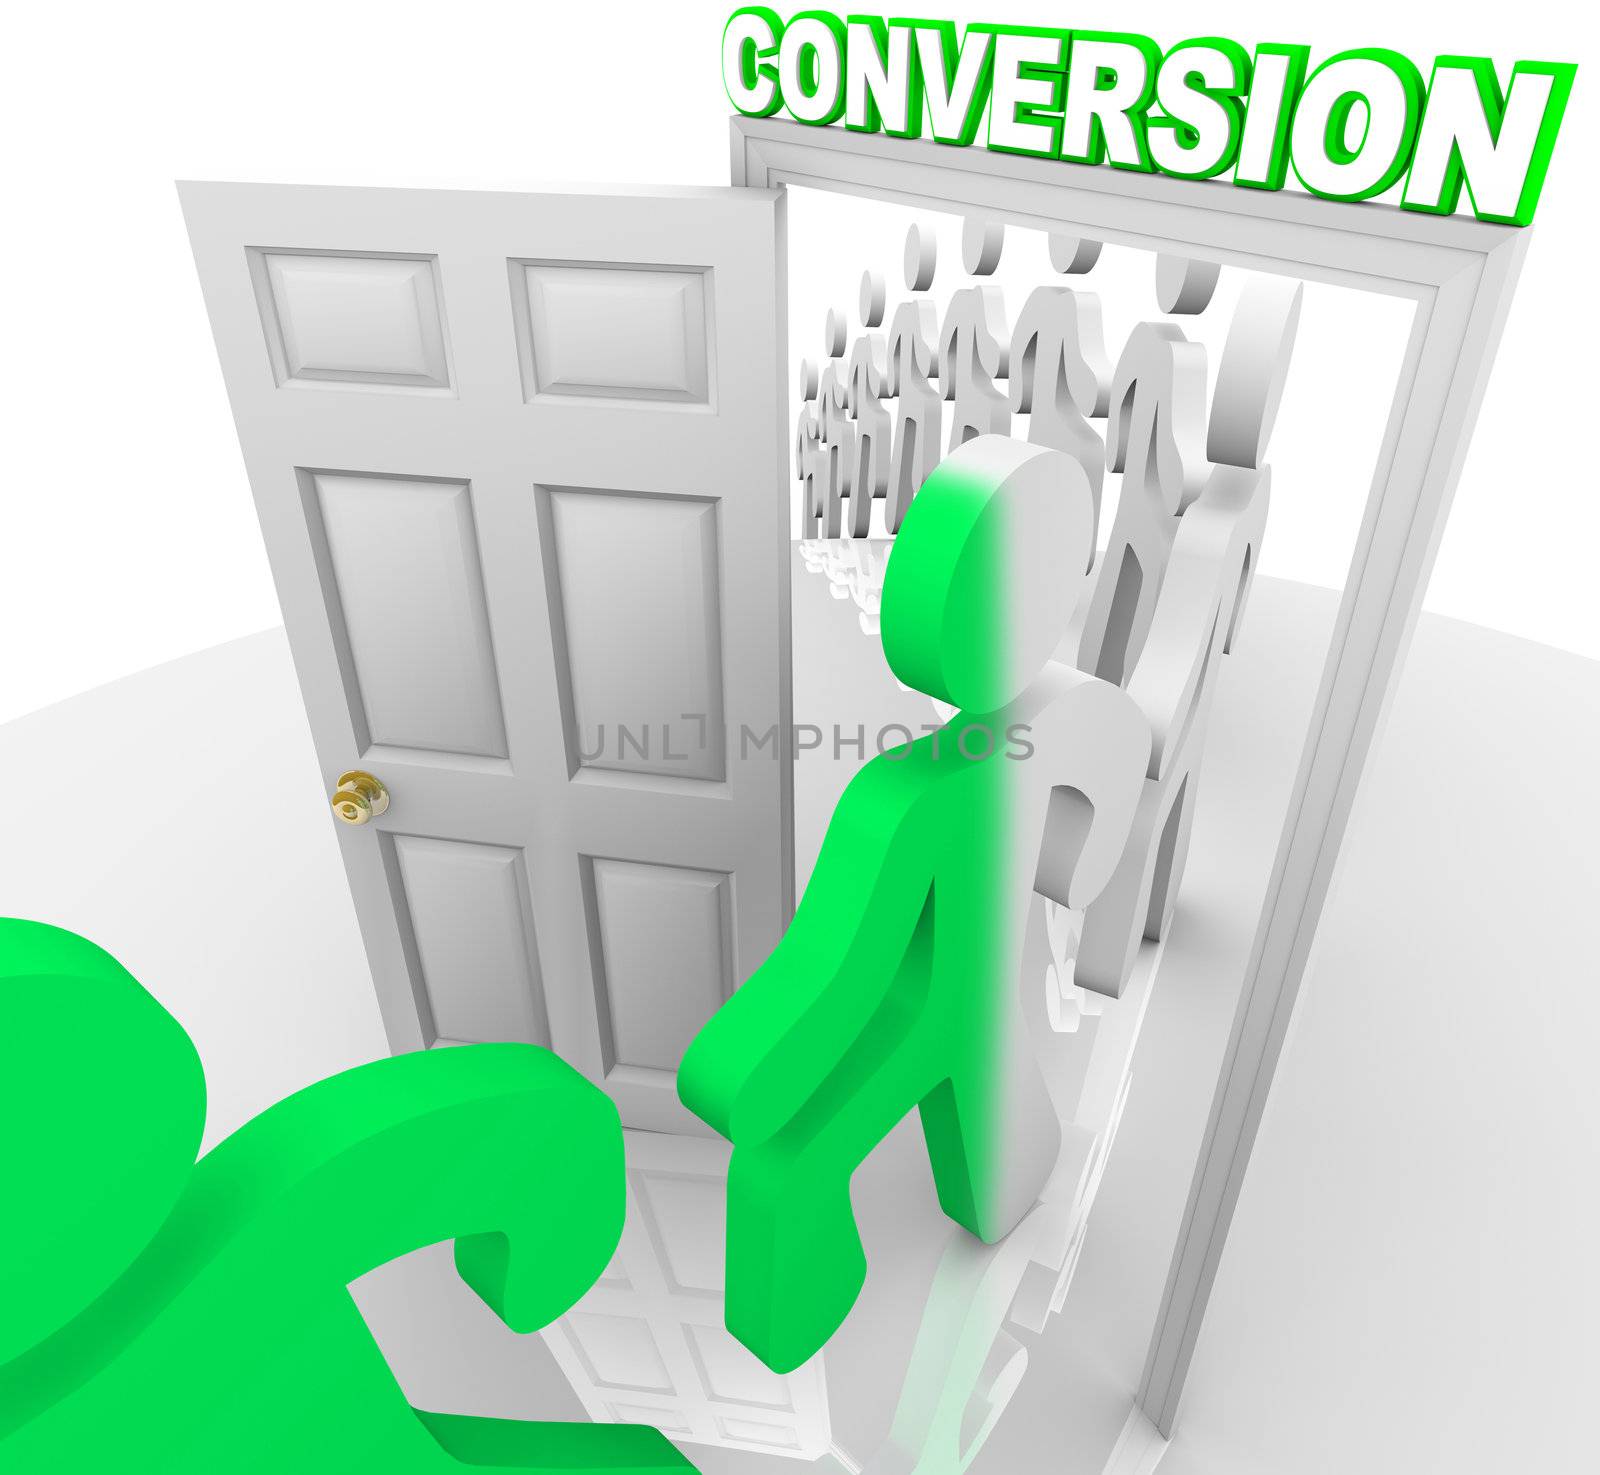 A line of people step through a doorway marked Conversion and are transformed from prospects into customers, symbolizing a successful sale